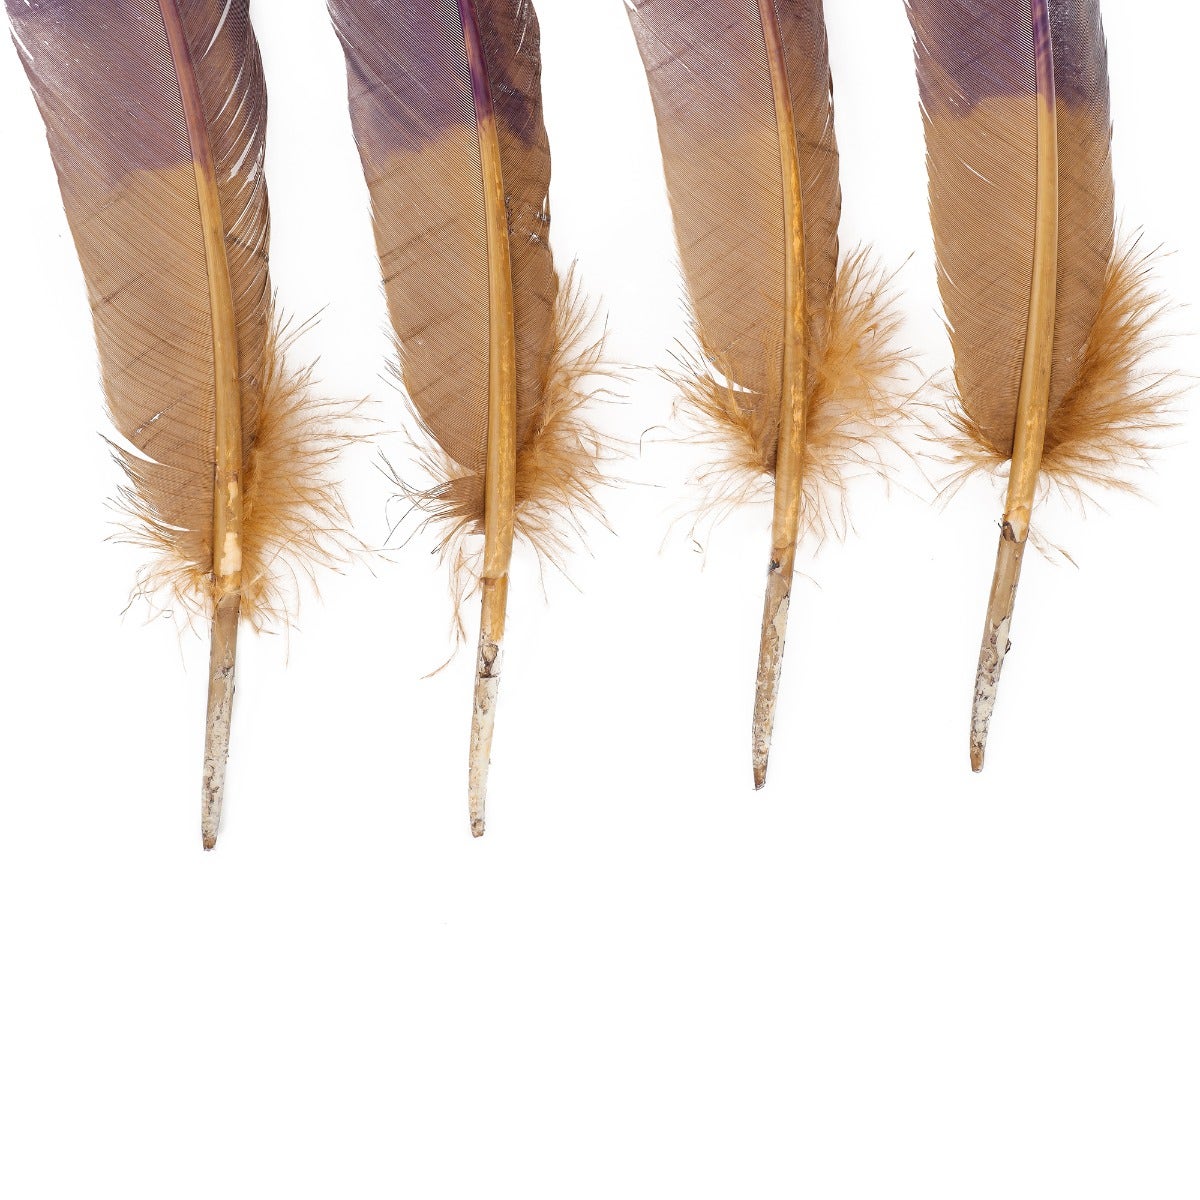 Bulk Two Tone Ombre Tipped Turkey Round Feathers Left Wing - 10-12” - 1/4 lb - Navy Camel